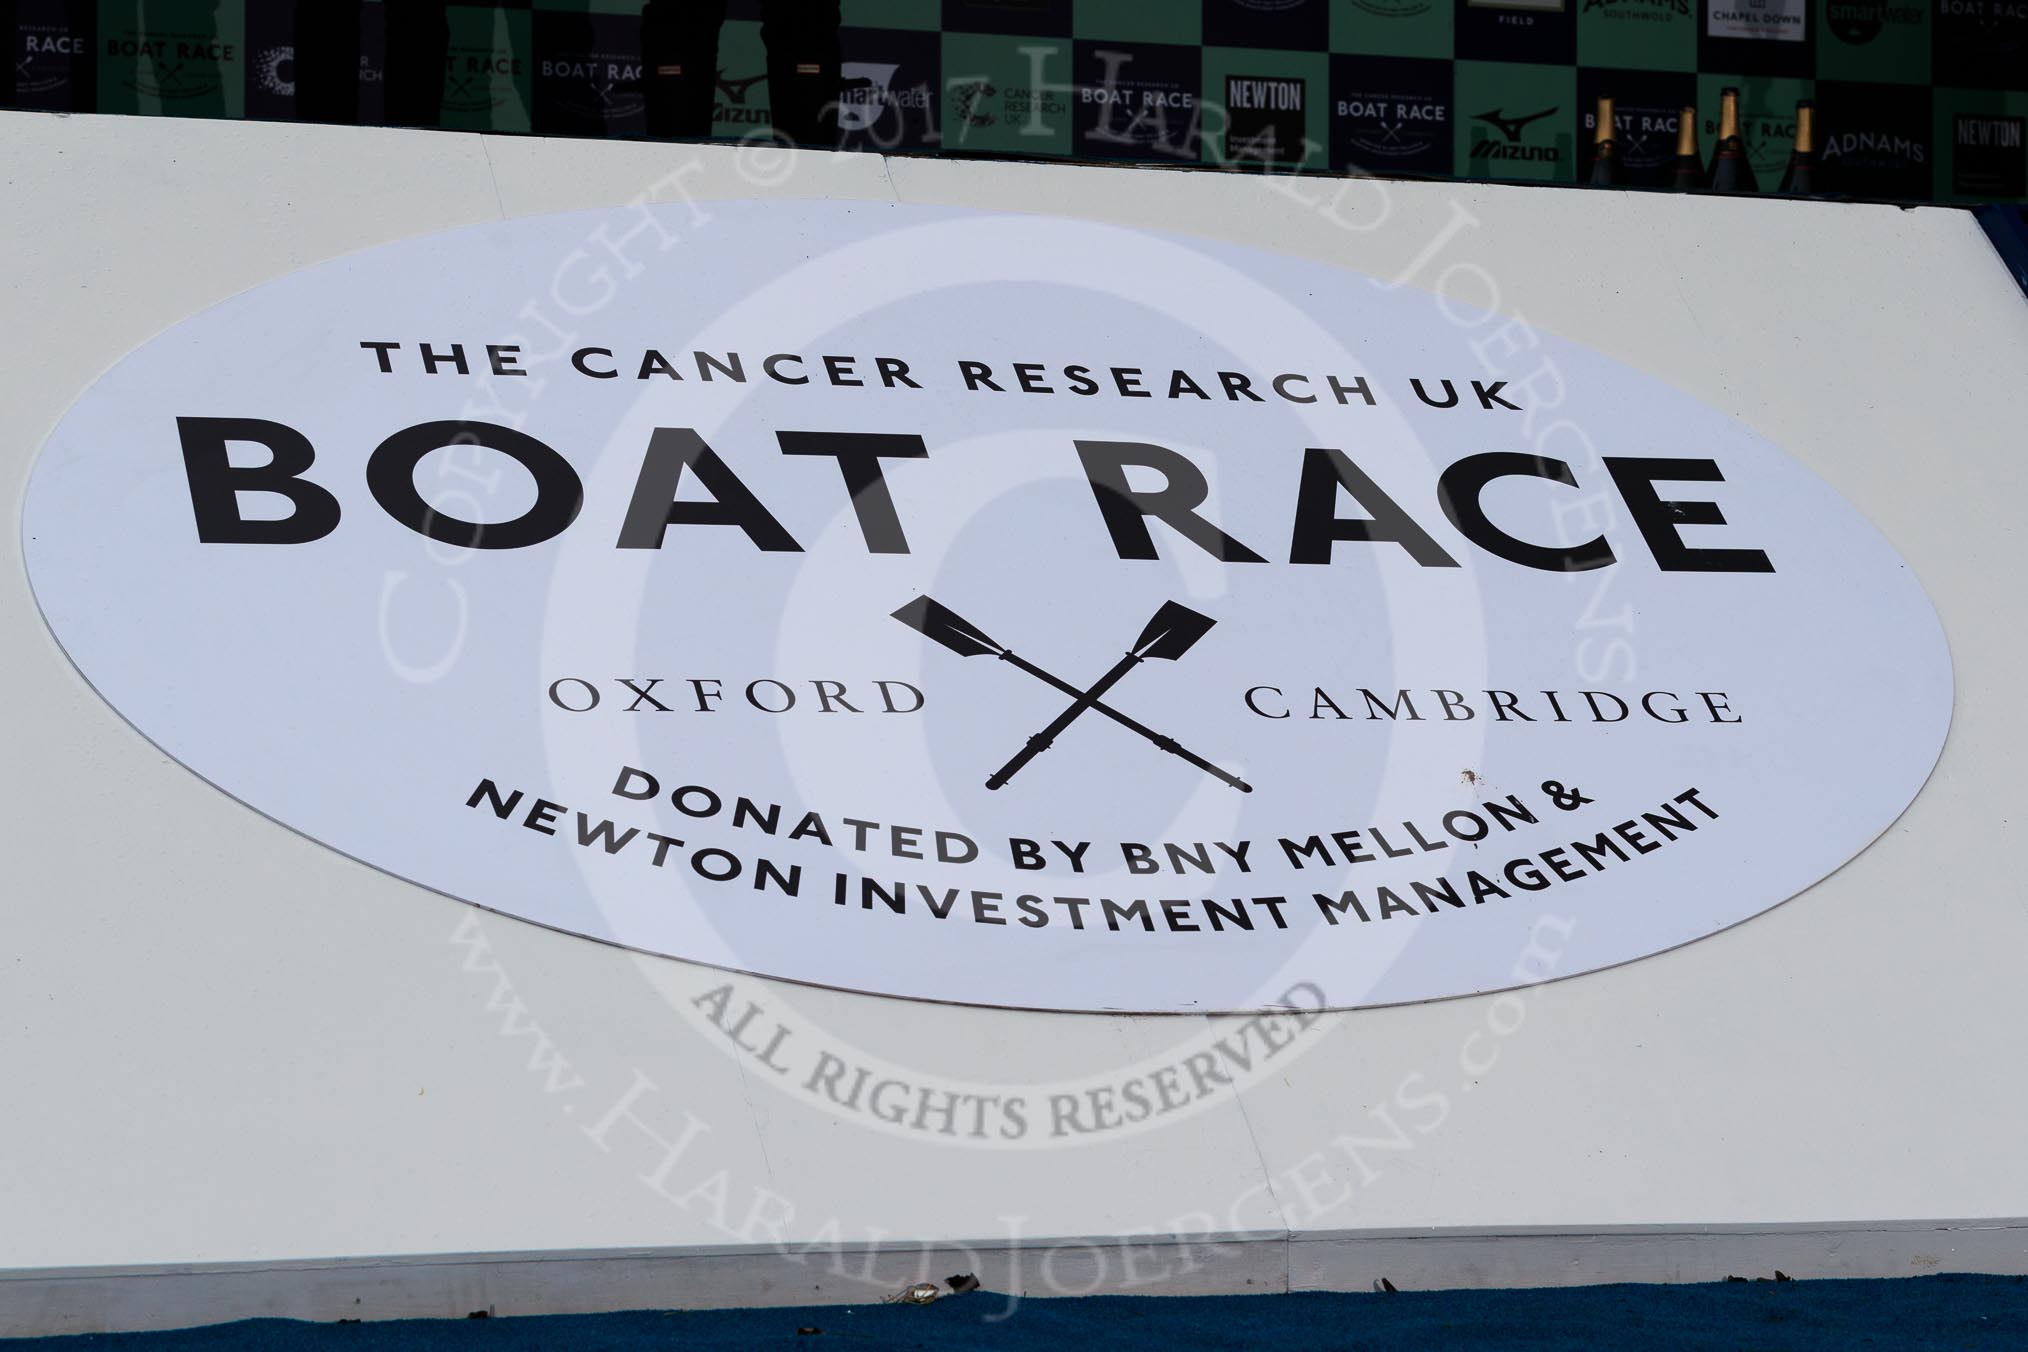 The Cancer Research UK Women's Boat Race 2018: The big sign at the podium for the Booat Race trophy presentation - "The Cancer Research UK Boat Race".
River Thames between Putney Bridge and Mortlake,
London SW15,

United Kingdom,
on 24 March 2018 at 17:05, image #235